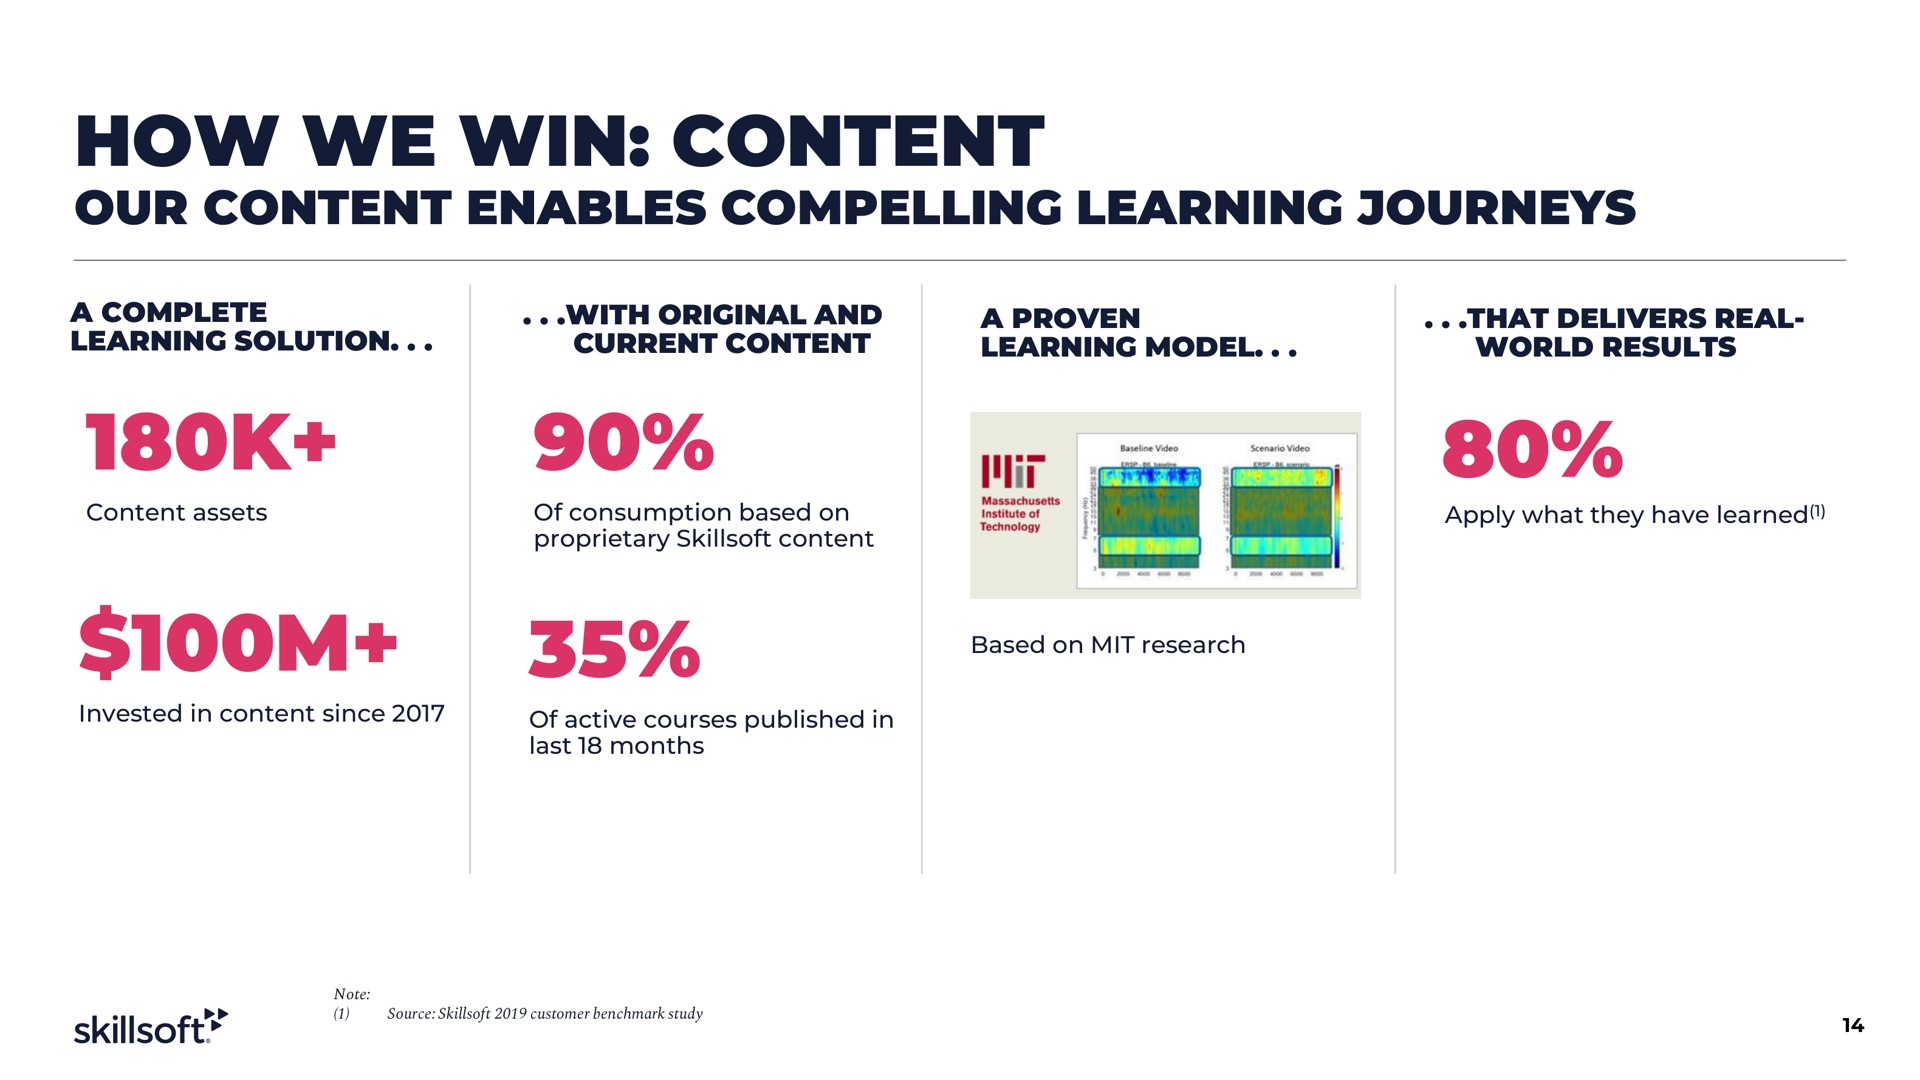 how we win content our enables compelling learning journeys nit coe | Skillsoft